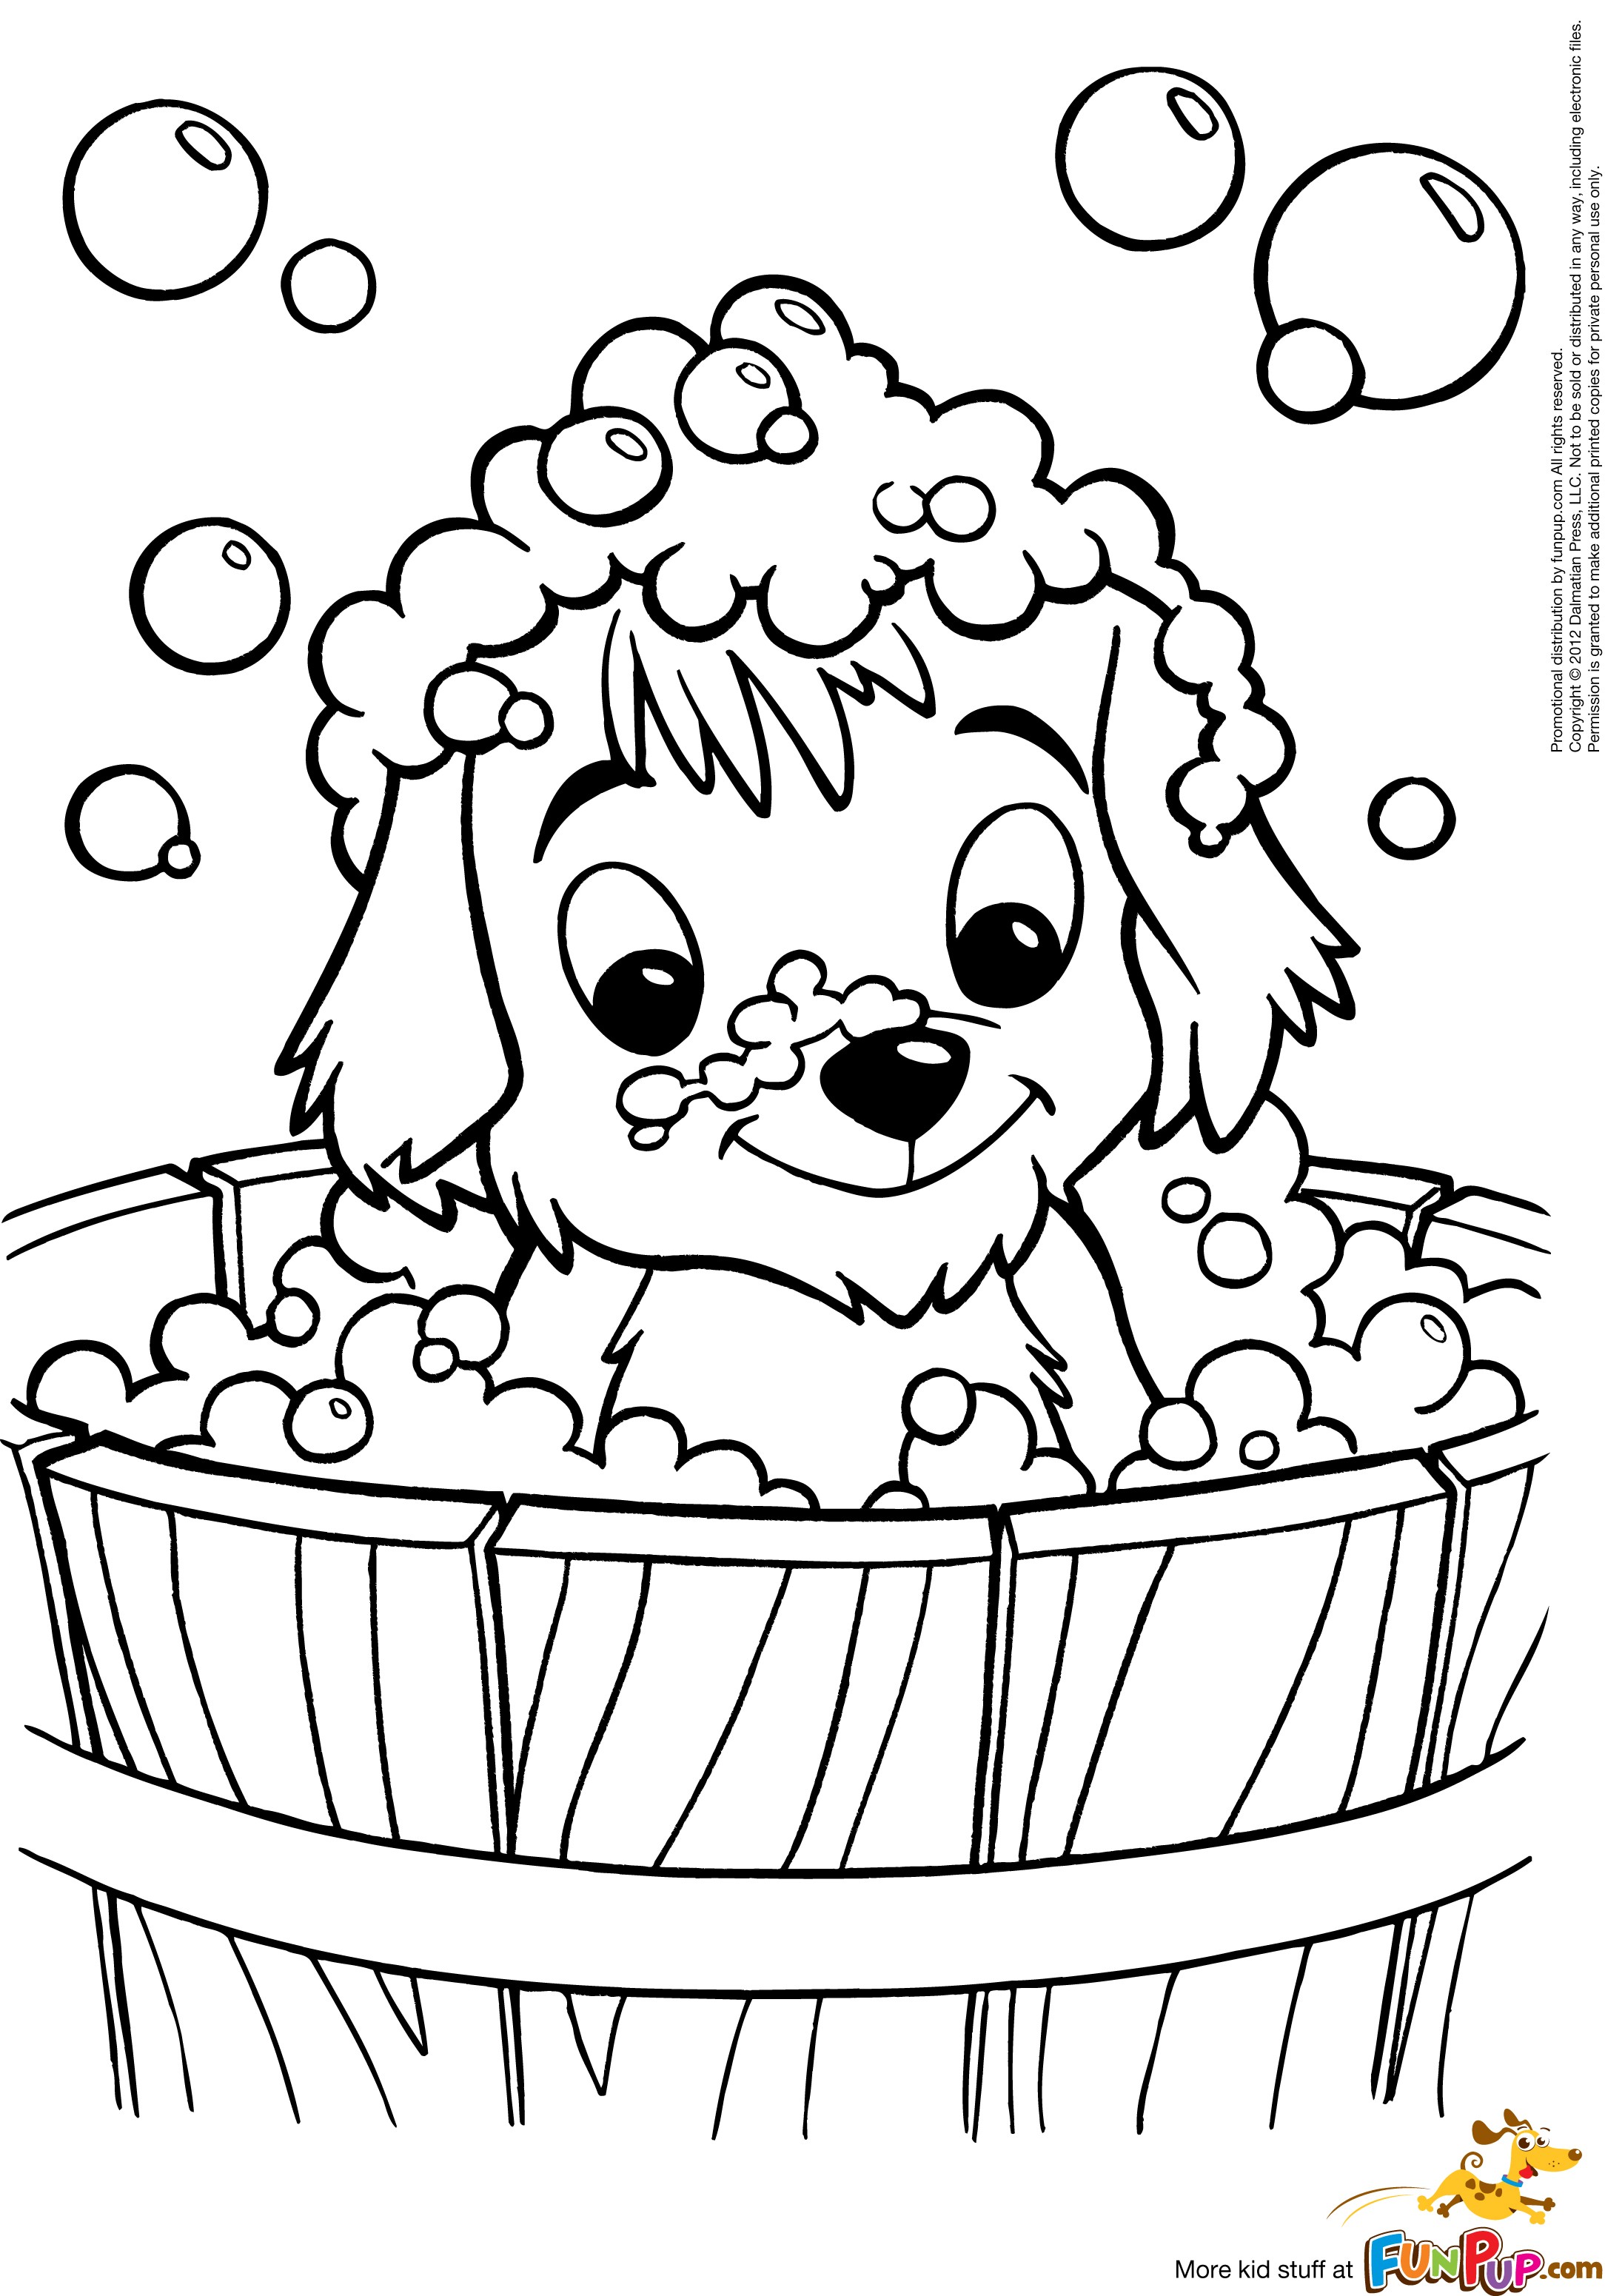 Labrador Puppy Coloring Pages at GetColorings.com | Free printable